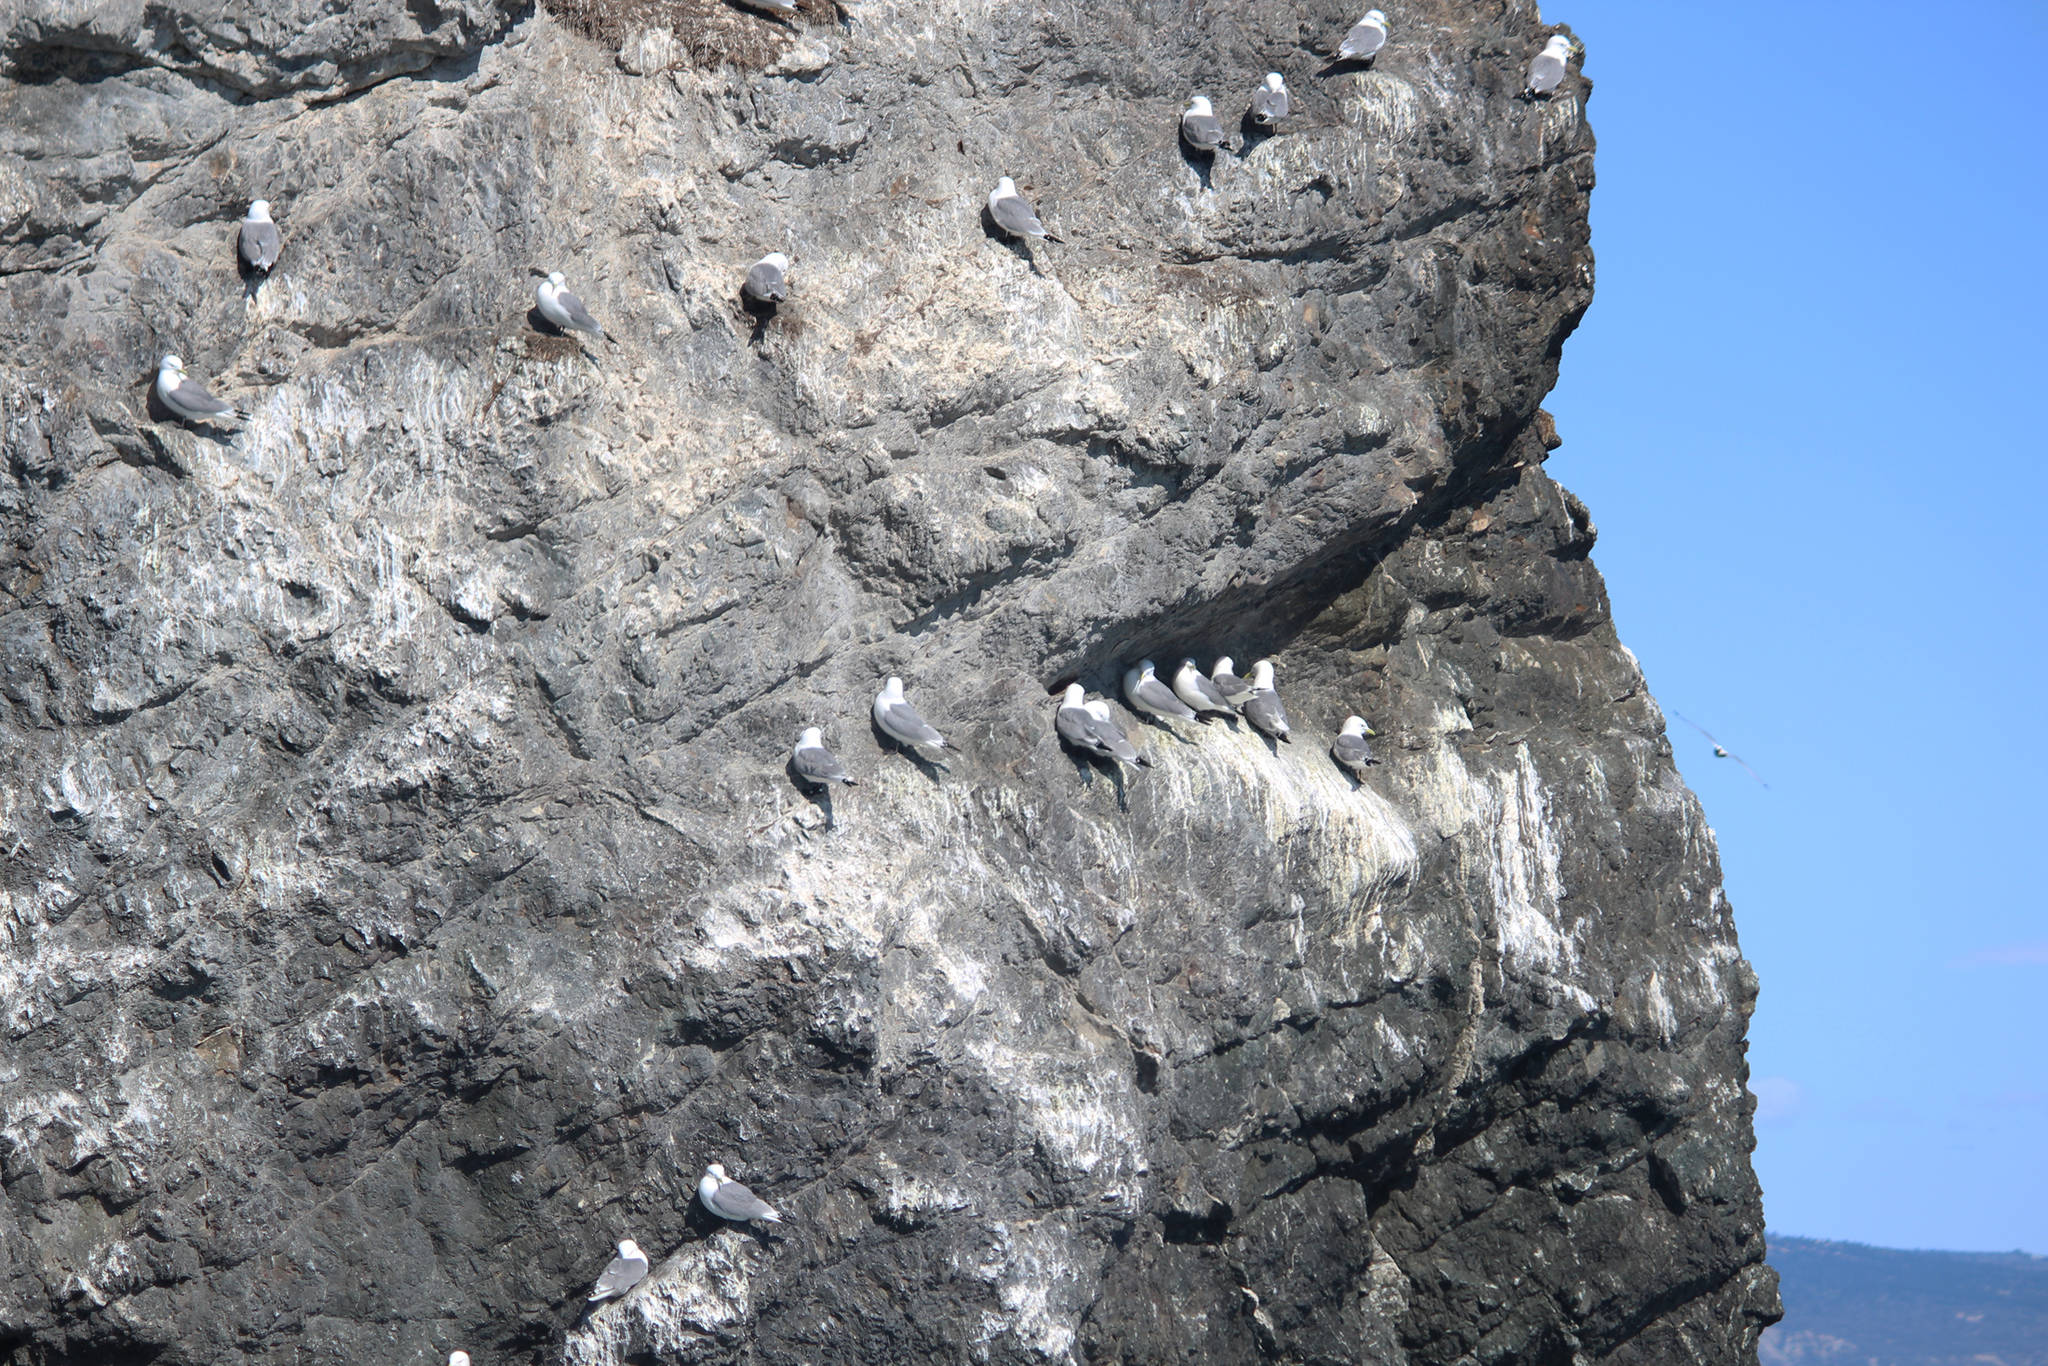 Birds find nooks and crannies in the rock to perk on Gull Island in Kachemak Bay on Saturday, April 14, 2018 on Homer, Alaska. (Photo by Megan Pacer/Homer News)